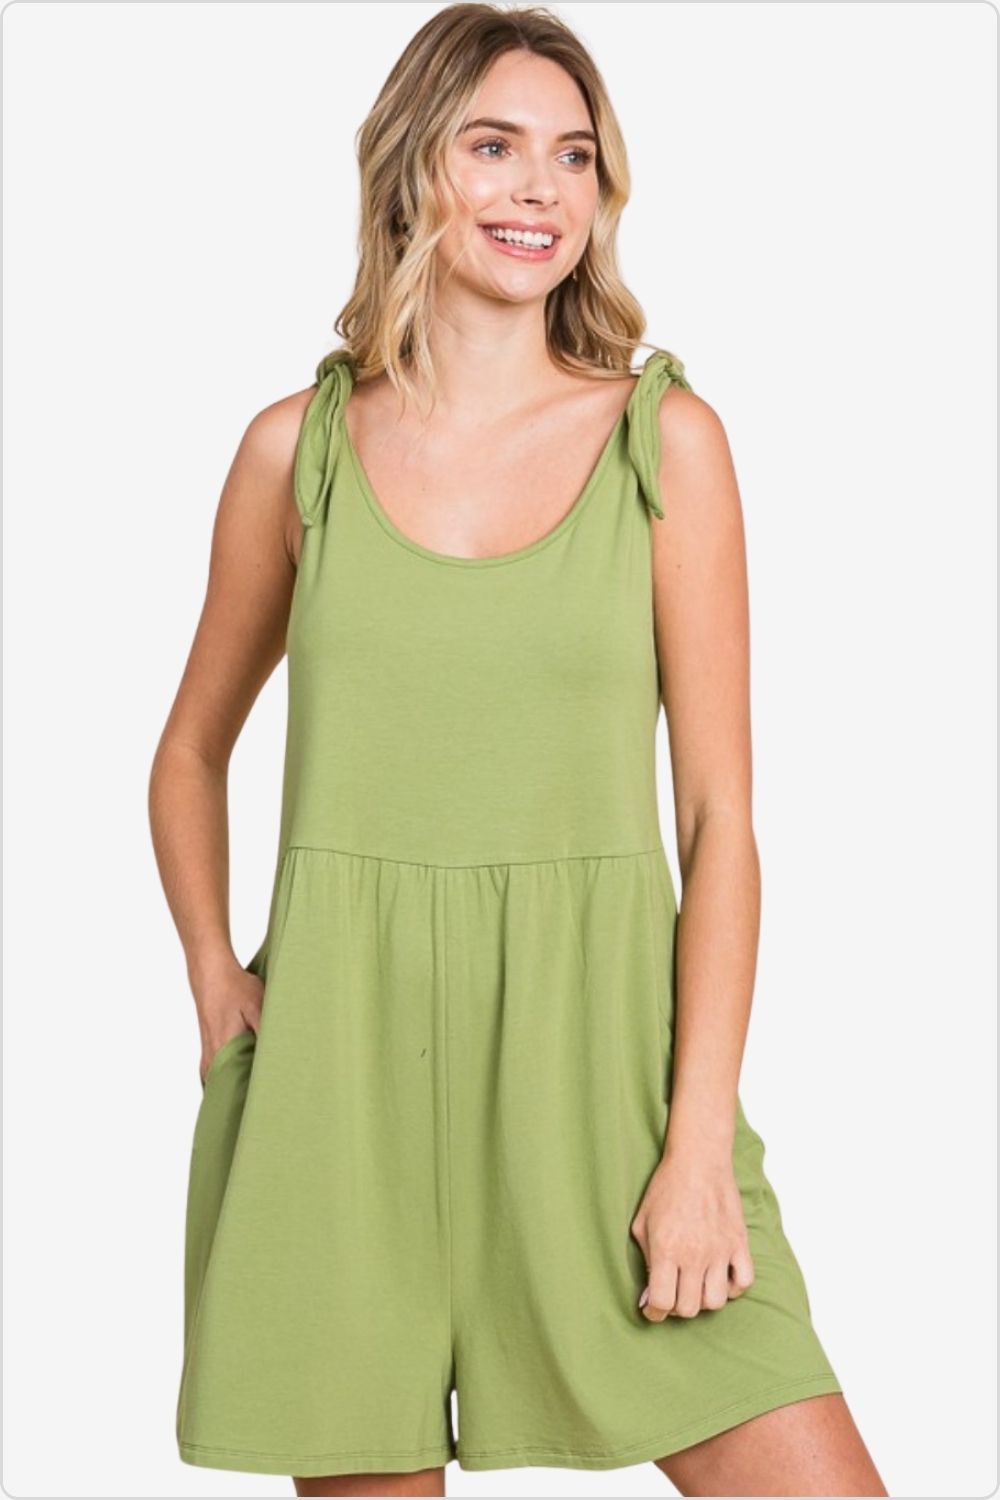 Stylish woman in a Shoulder Knot Baggy Romper, ideal for casual summer days, Color Happy Olive